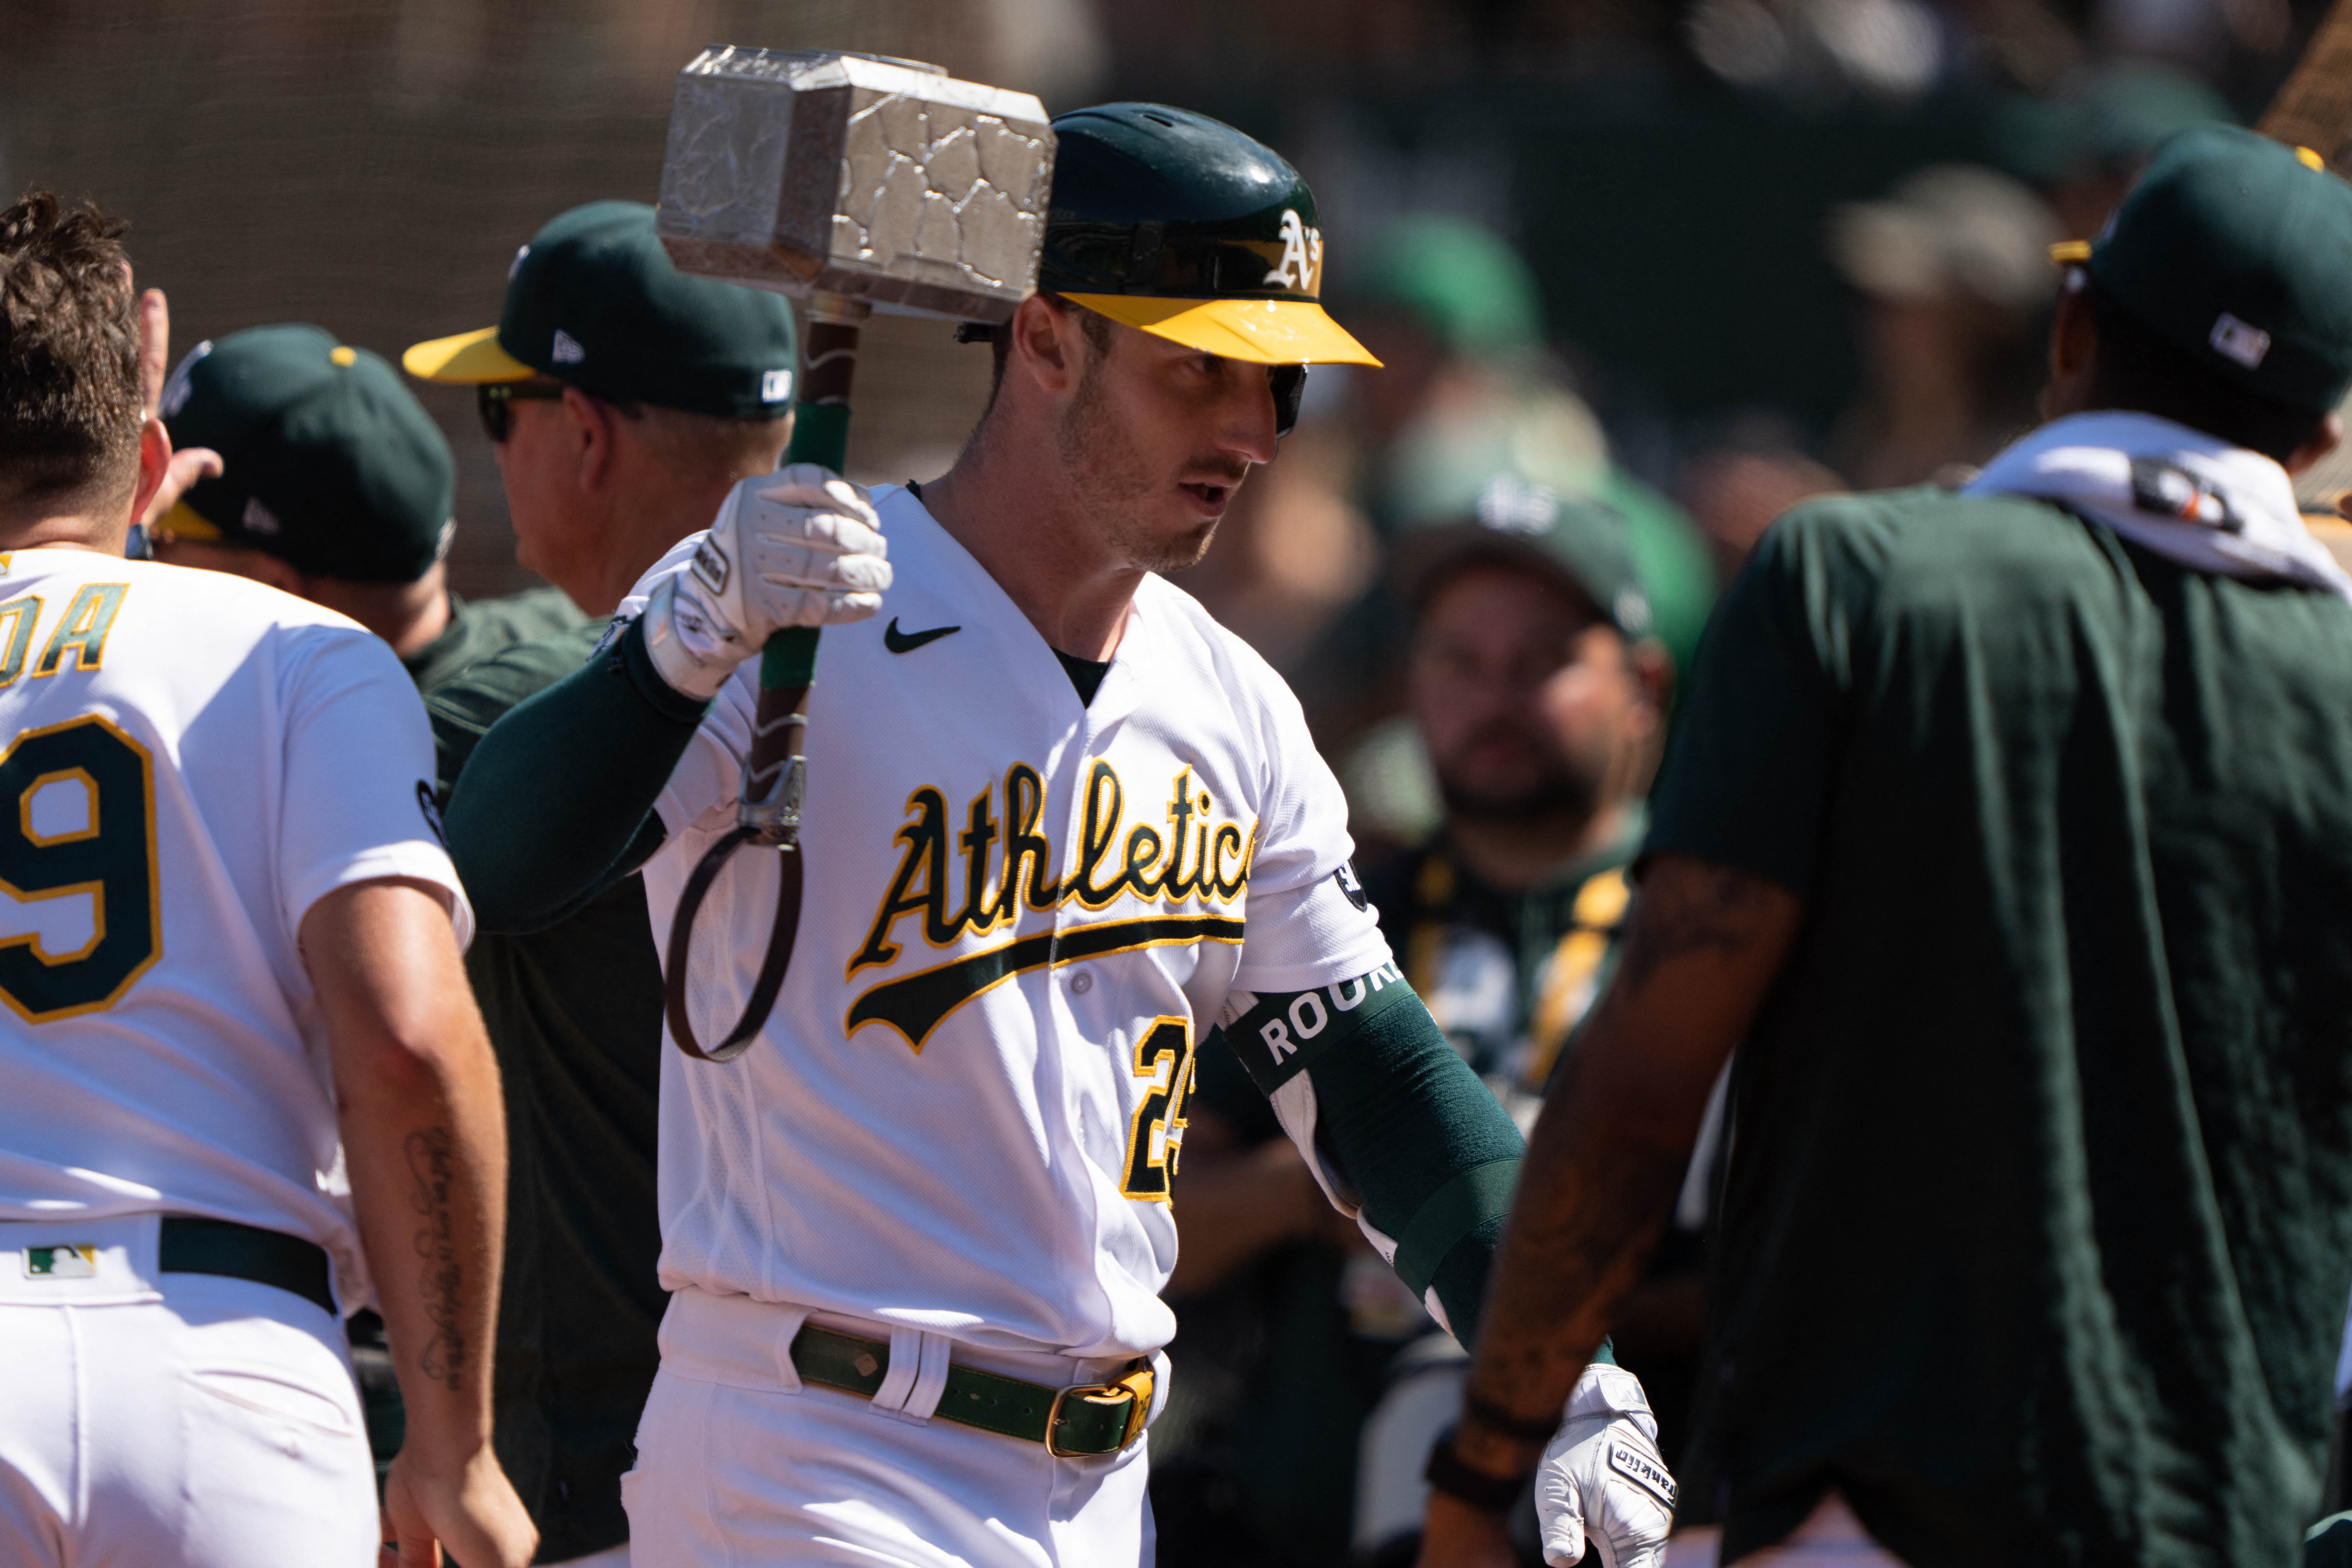 A's beat White Sox 7-4 to move Melvin closer to milestone - The Pajaronian